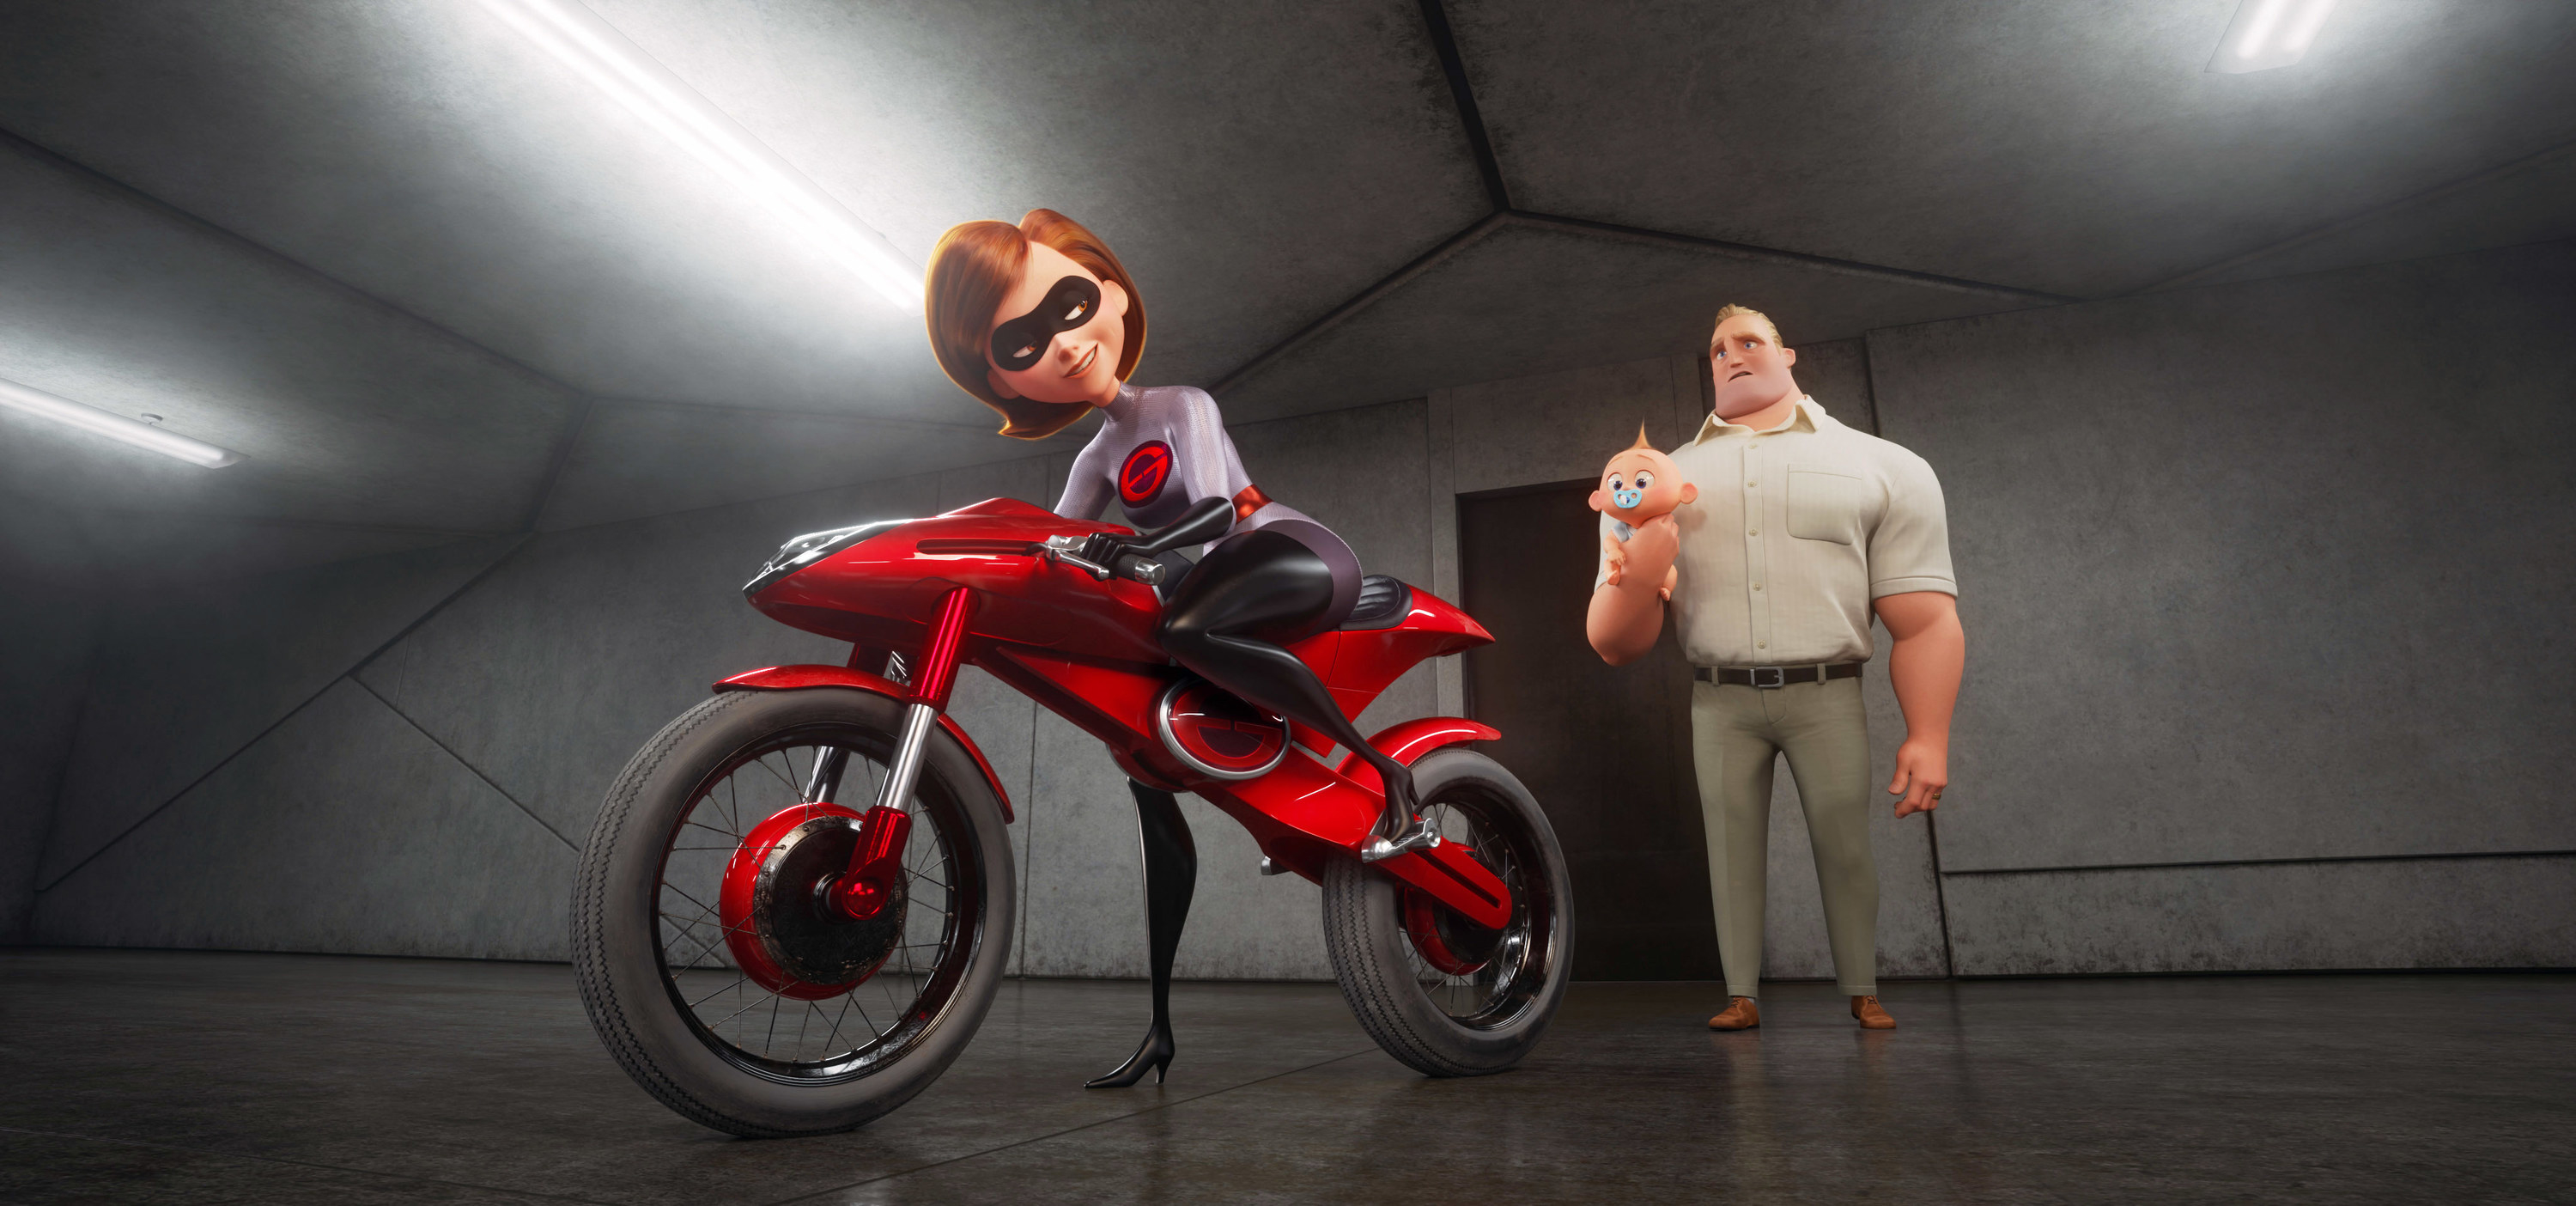 Elastigirl gets on a motorcycle while Bob Parr and Jack-Jack look on